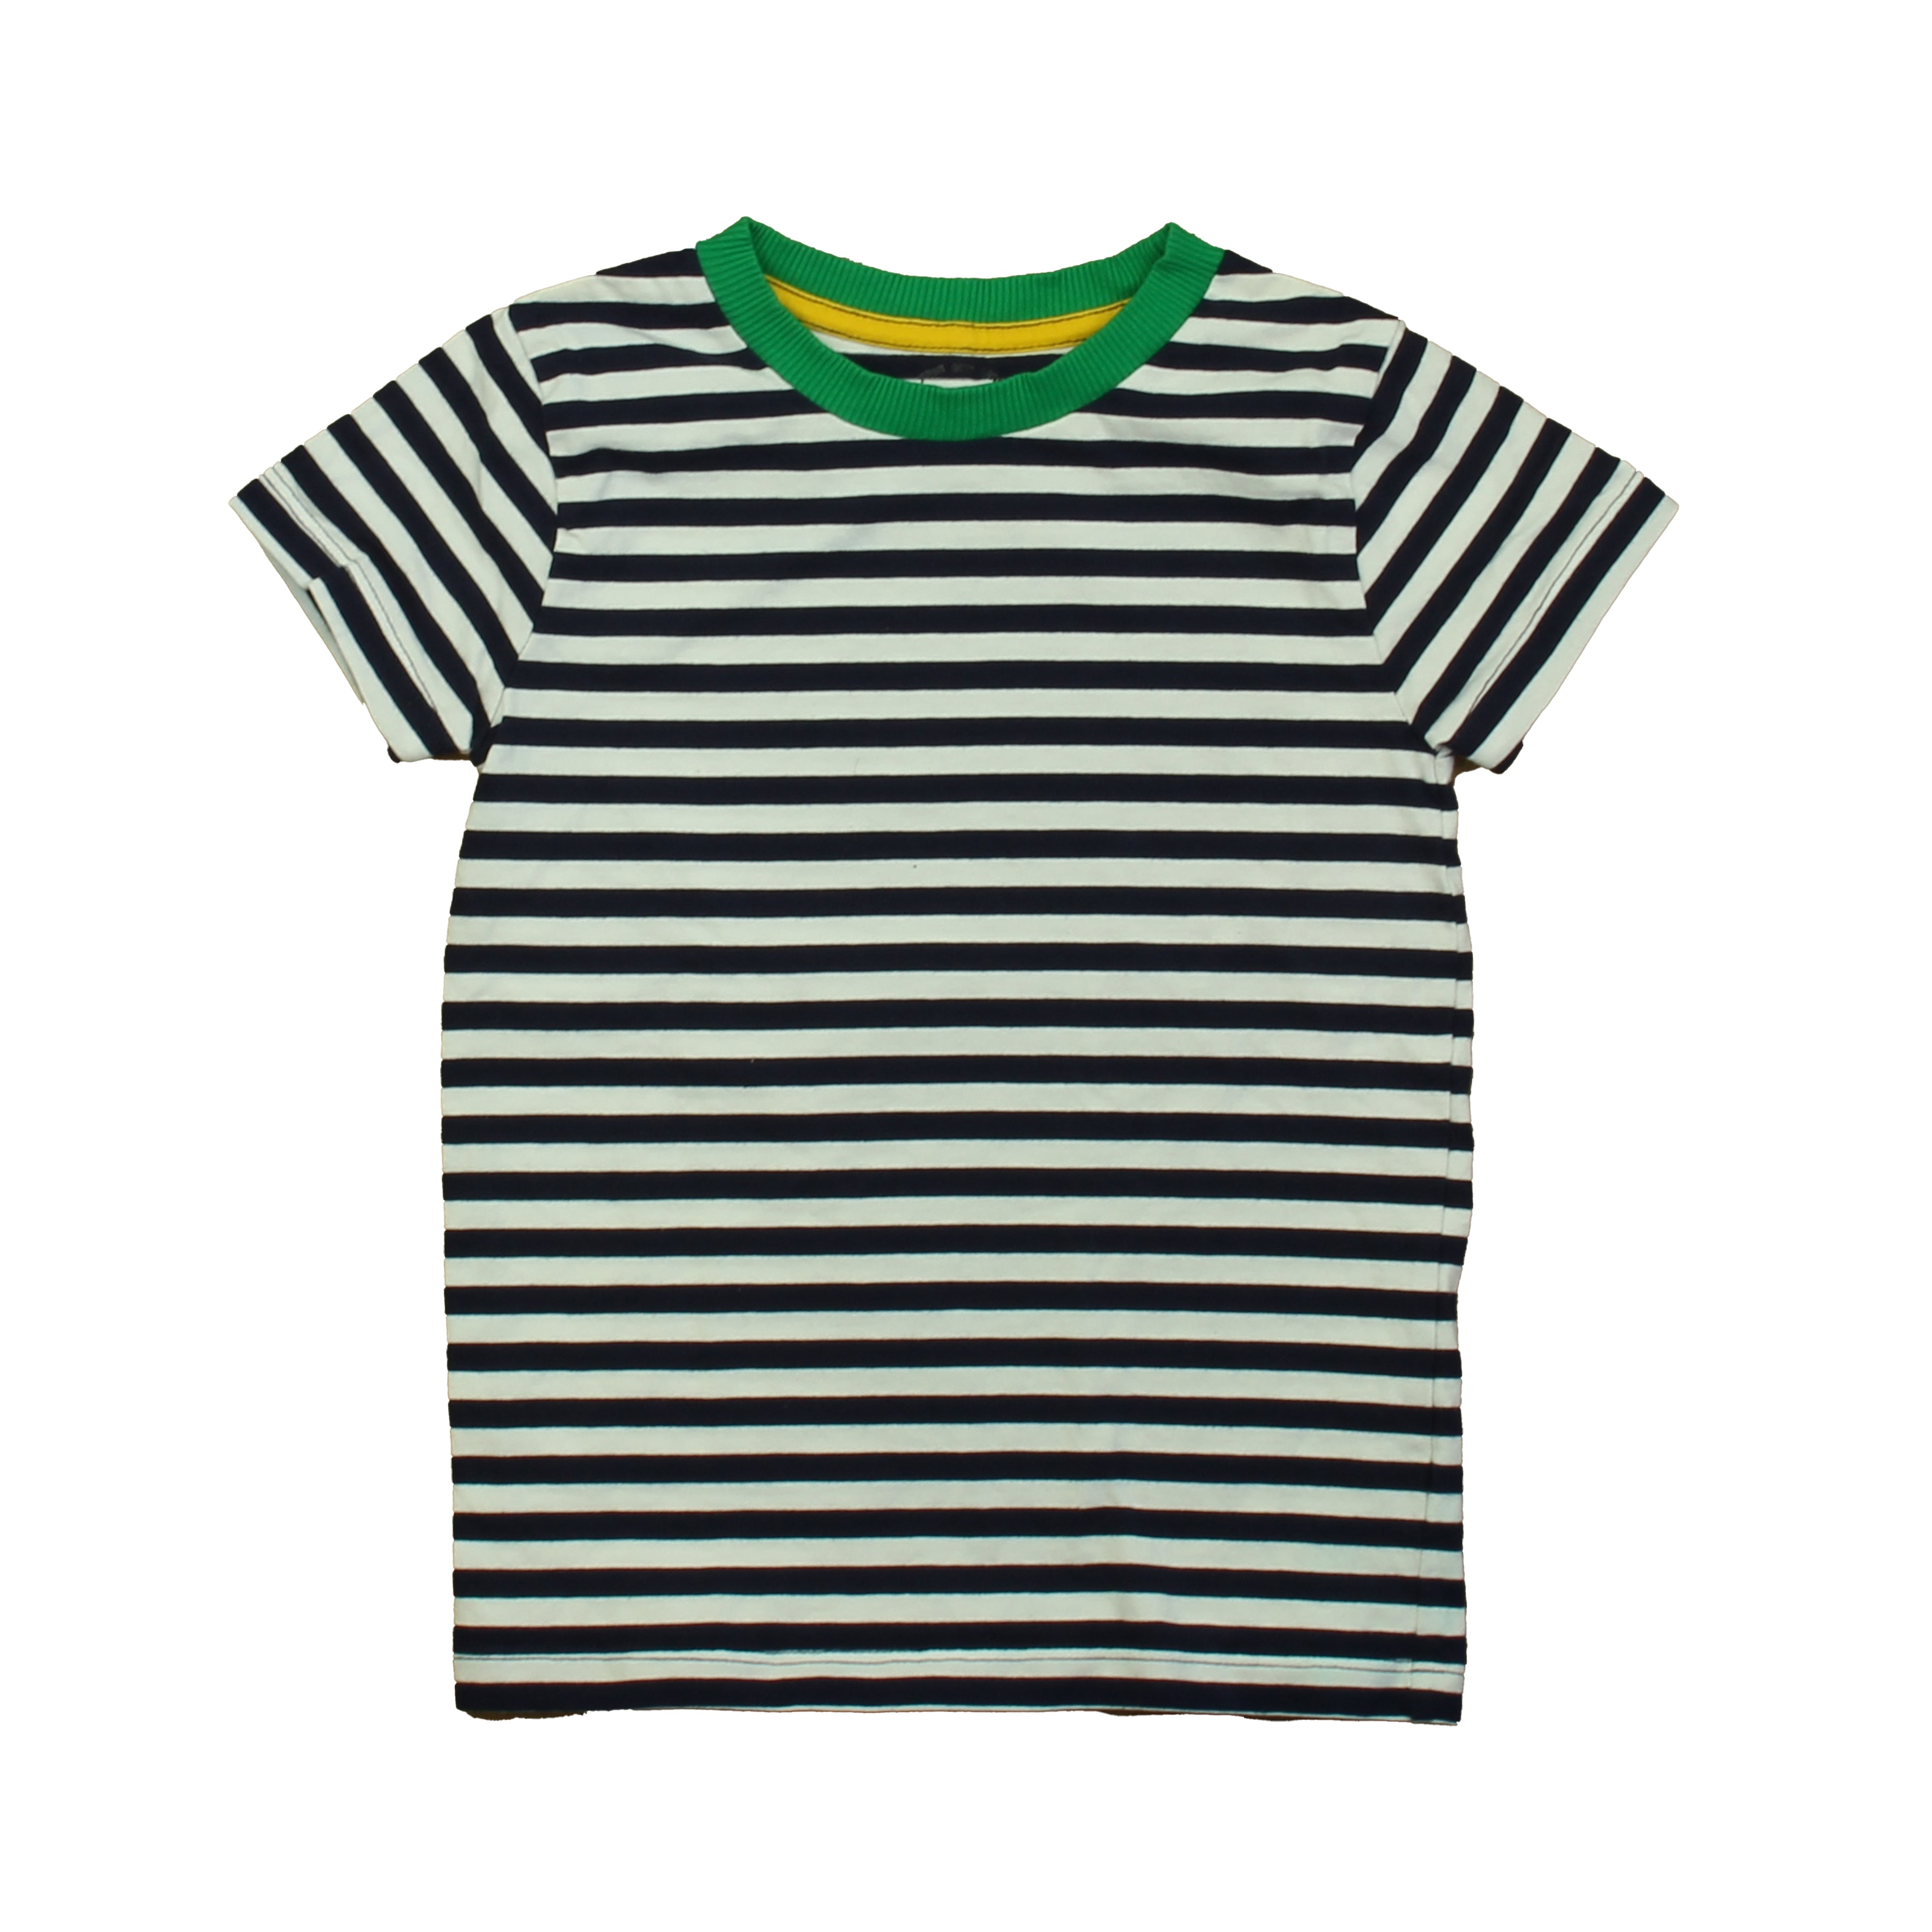 Pre-owned Navy Stripe T-Shirt size: 6-7 Years